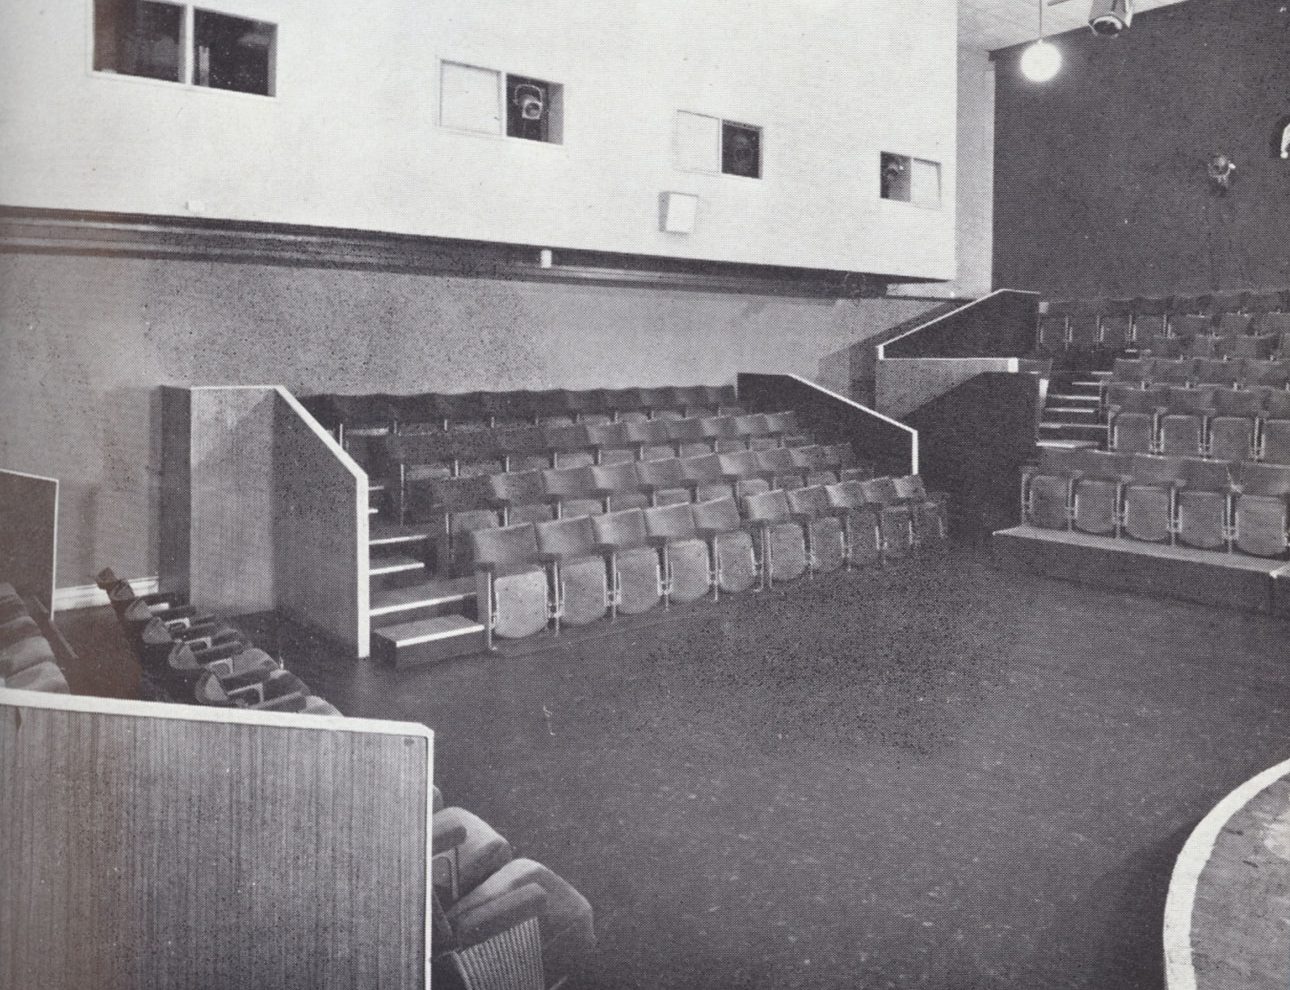 The interior of the Close Theatre. A small stage surrounded by rows of seats.